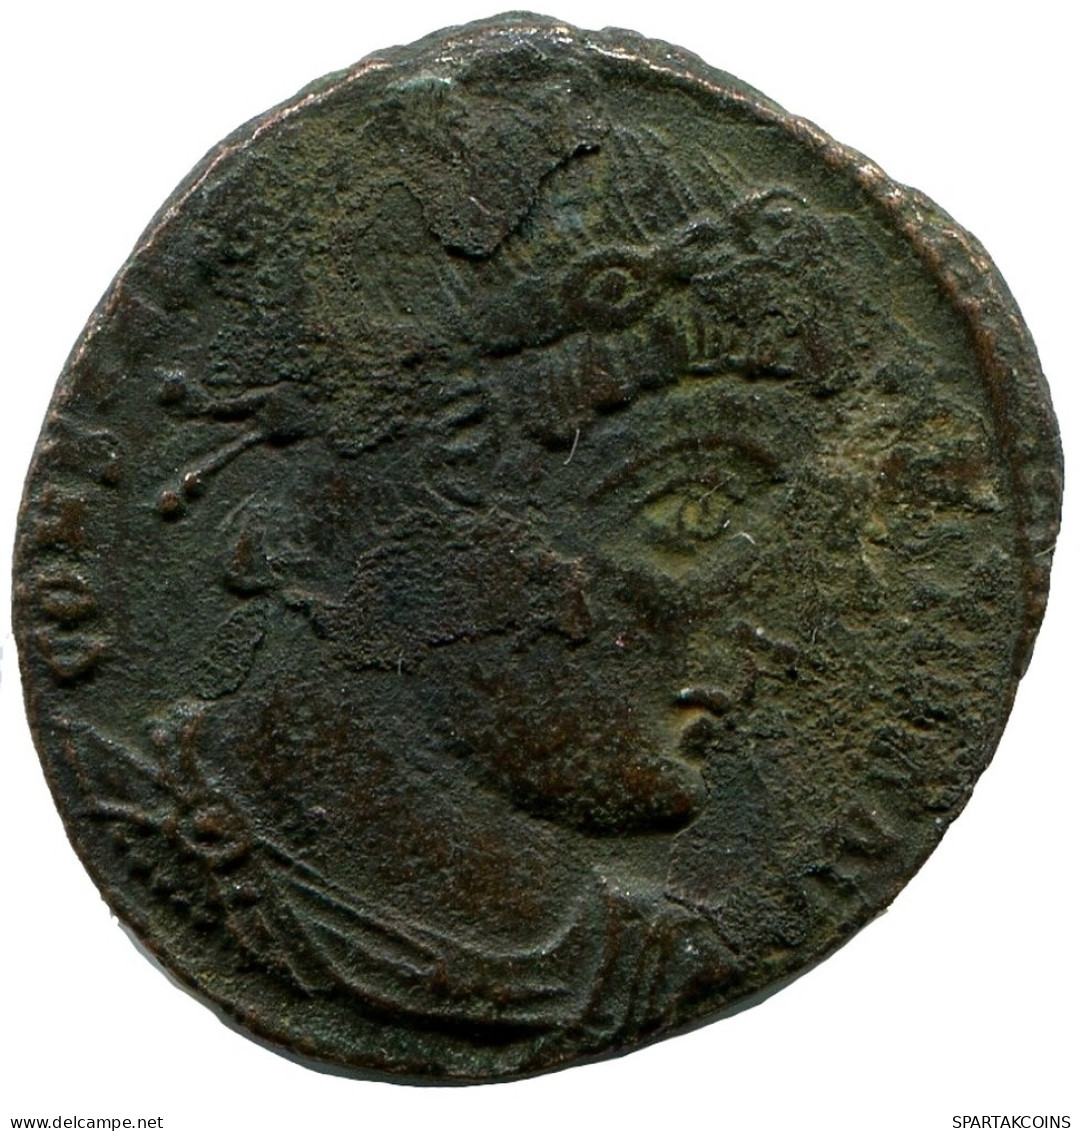 CONSTANTINE I MINTED IN ANTIOCH FOUND IN IHNASYAH HOARD EGYPT #ANC10590.14.E.A - The Christian Empire (307 AD To 363 AD)